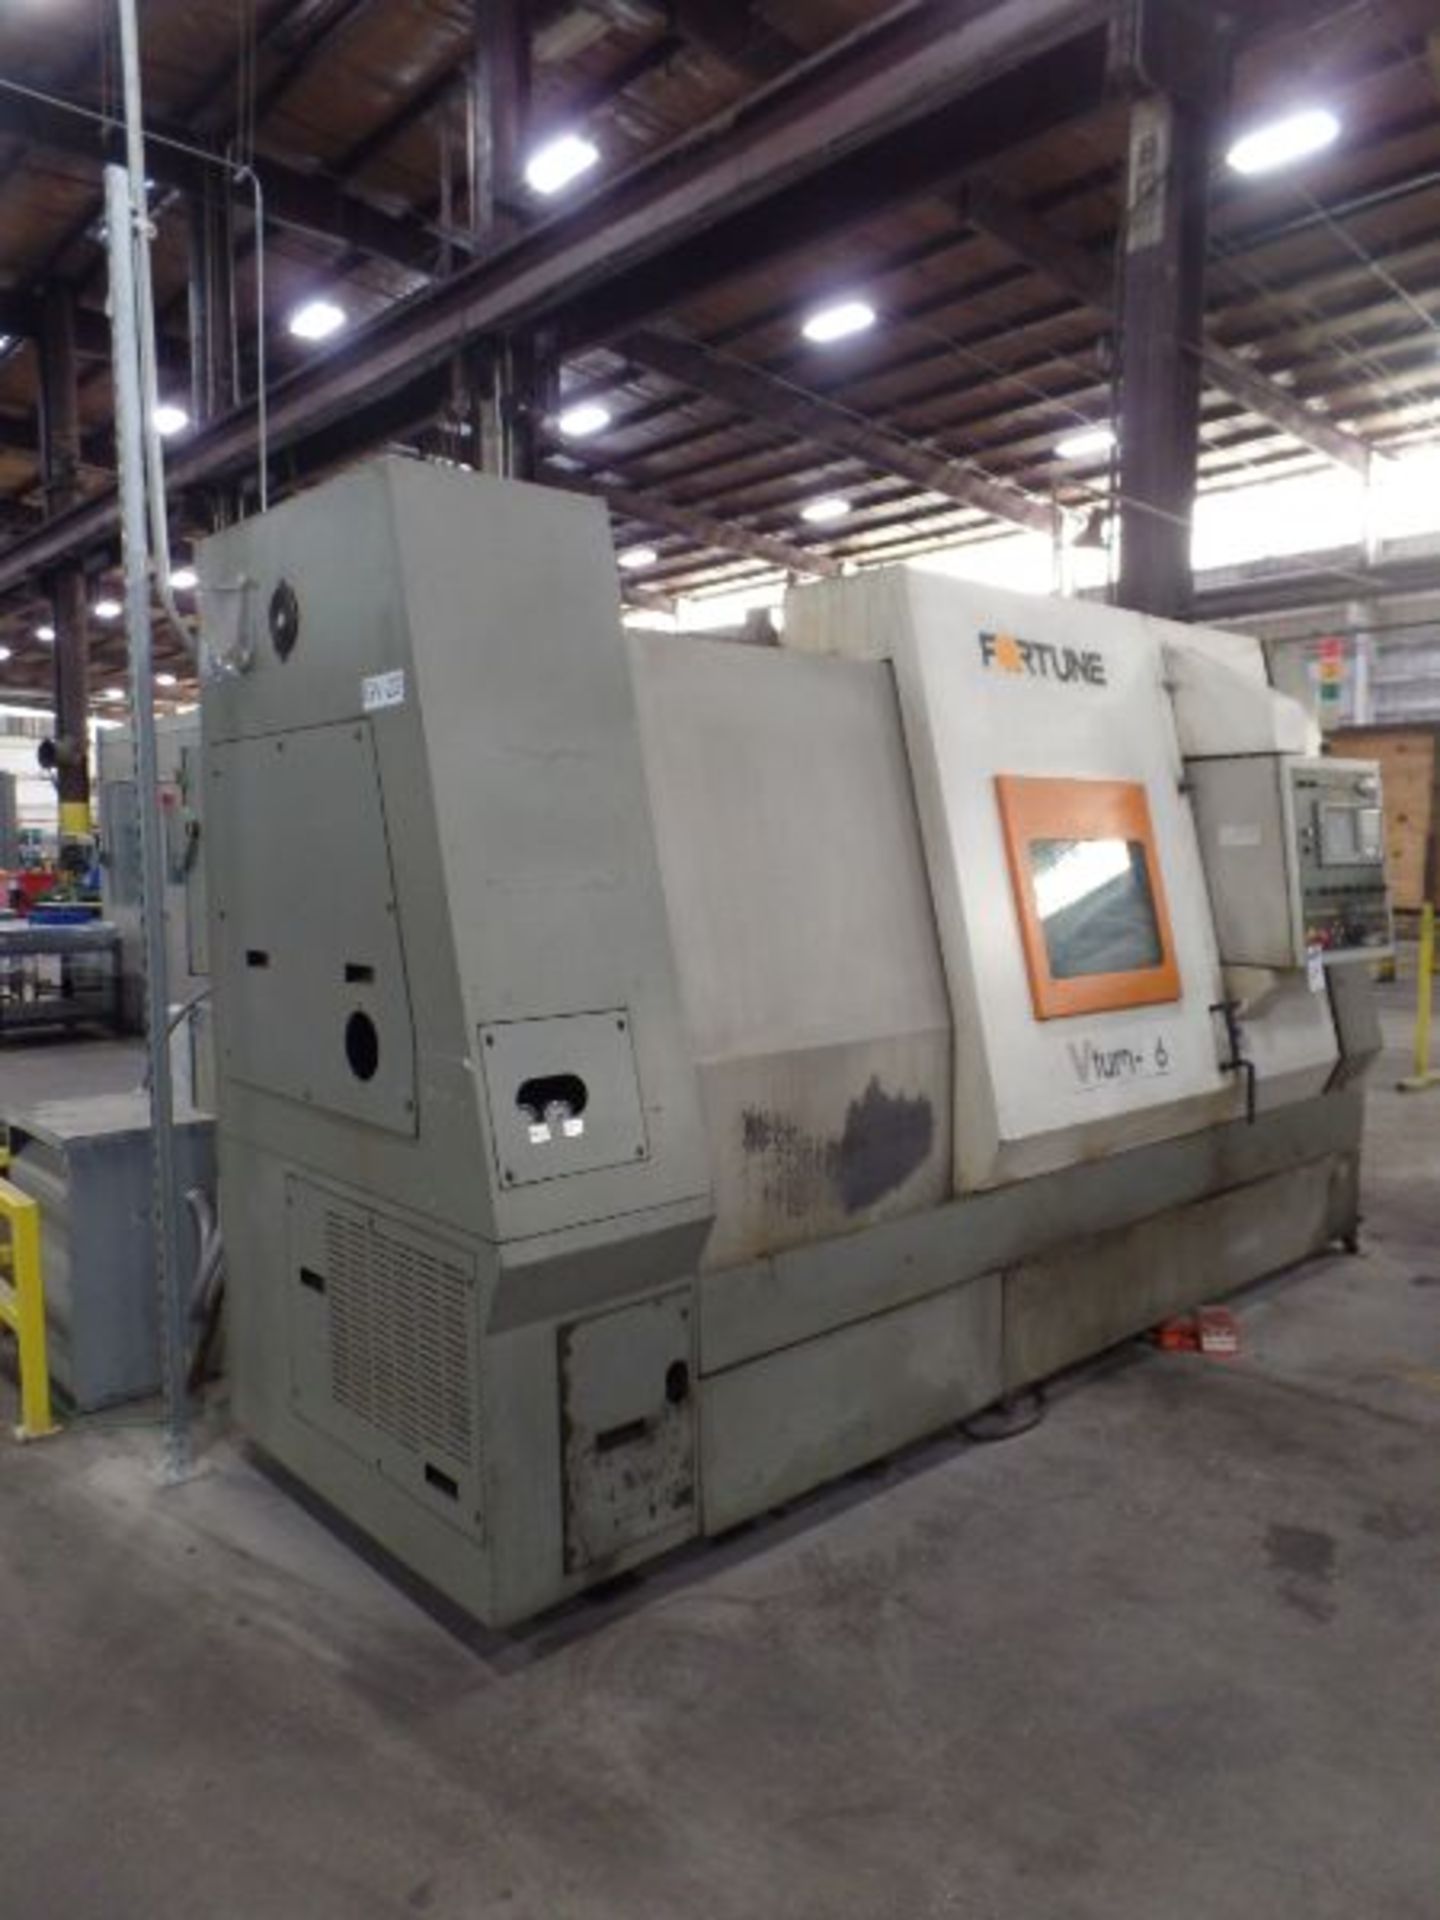 Fortune Vturn-36, Fanuc 0i-T, 25.6” SW, 21.7” Max. Turn Dia. x 51” Centers, 4.1” Spindle Bore, - Image 2 of 10